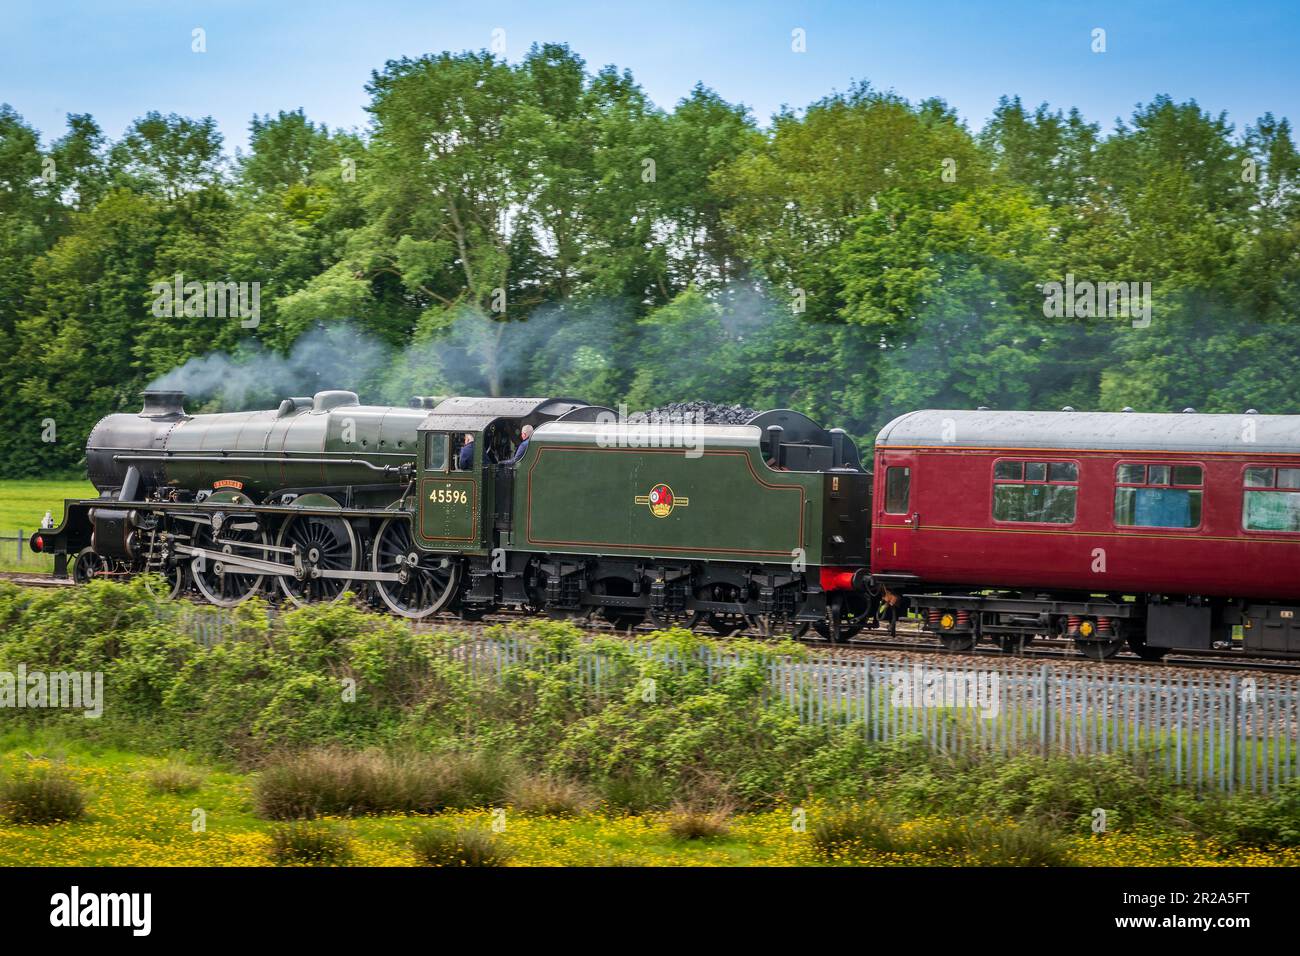 Jubilee class steam locomotive named Bahamas at speed. Stock Photo